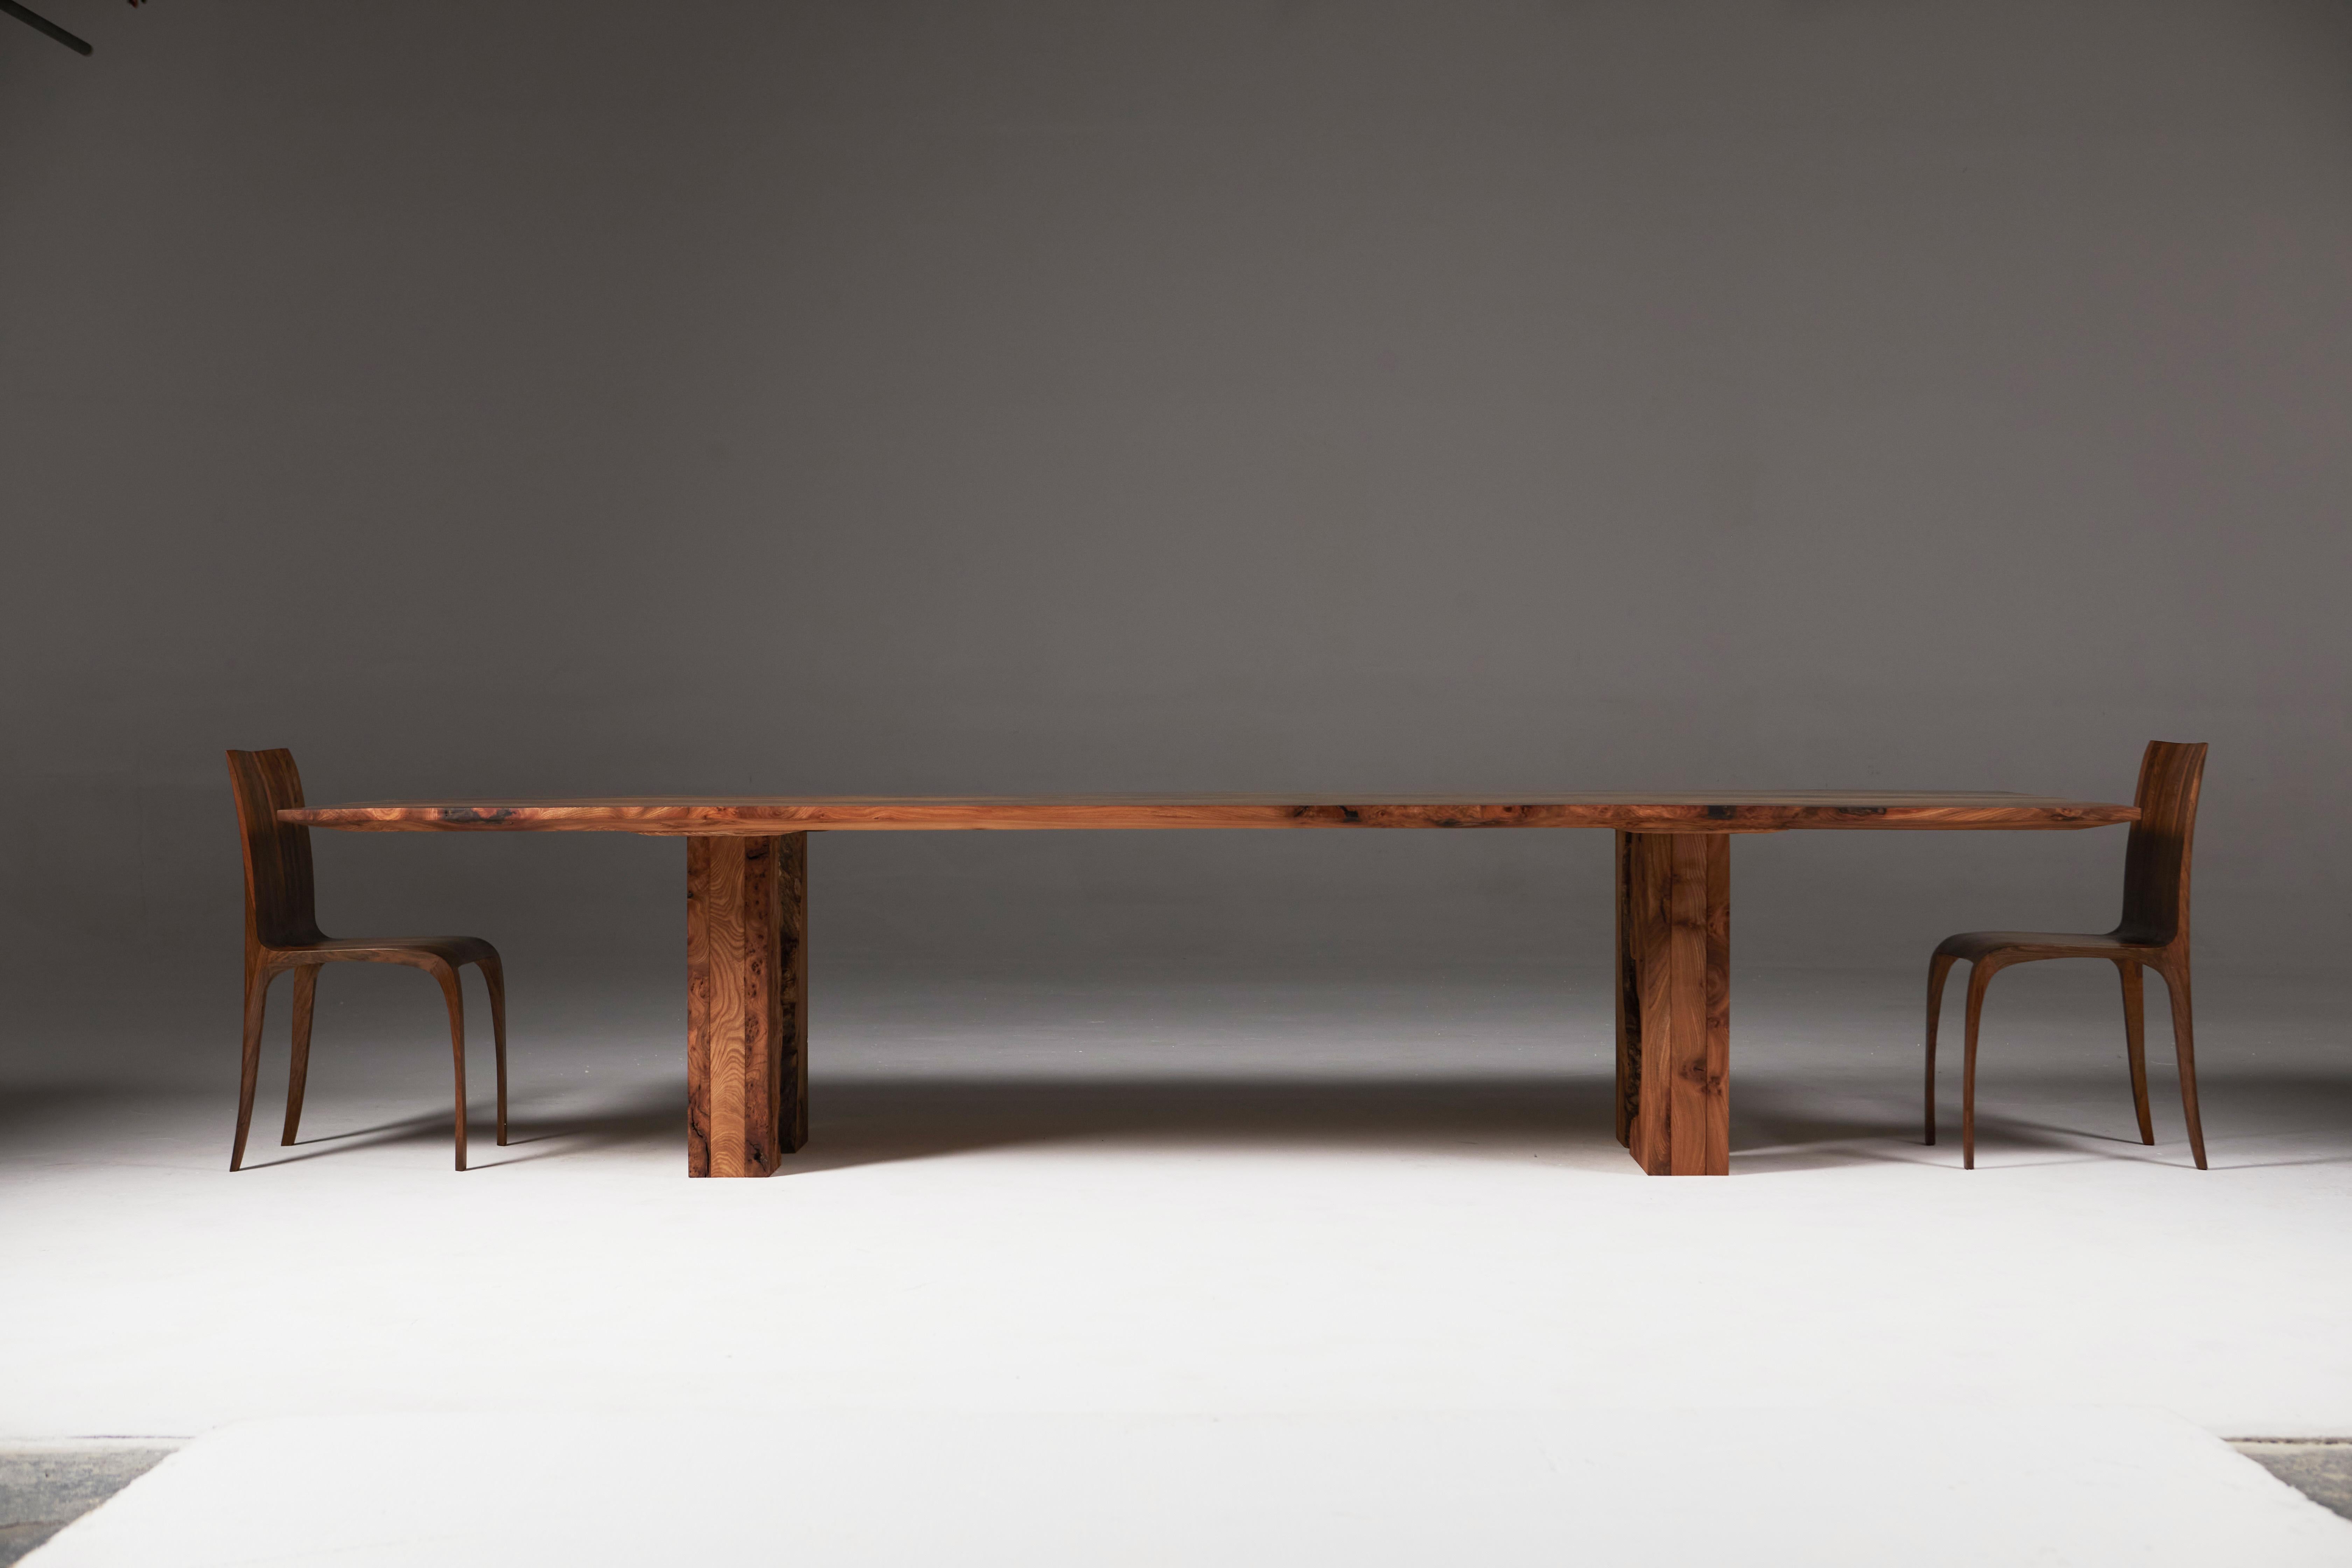 Scottish Burr Elm Table with Inverted Live Edge Legs and Book-matched Top.  7